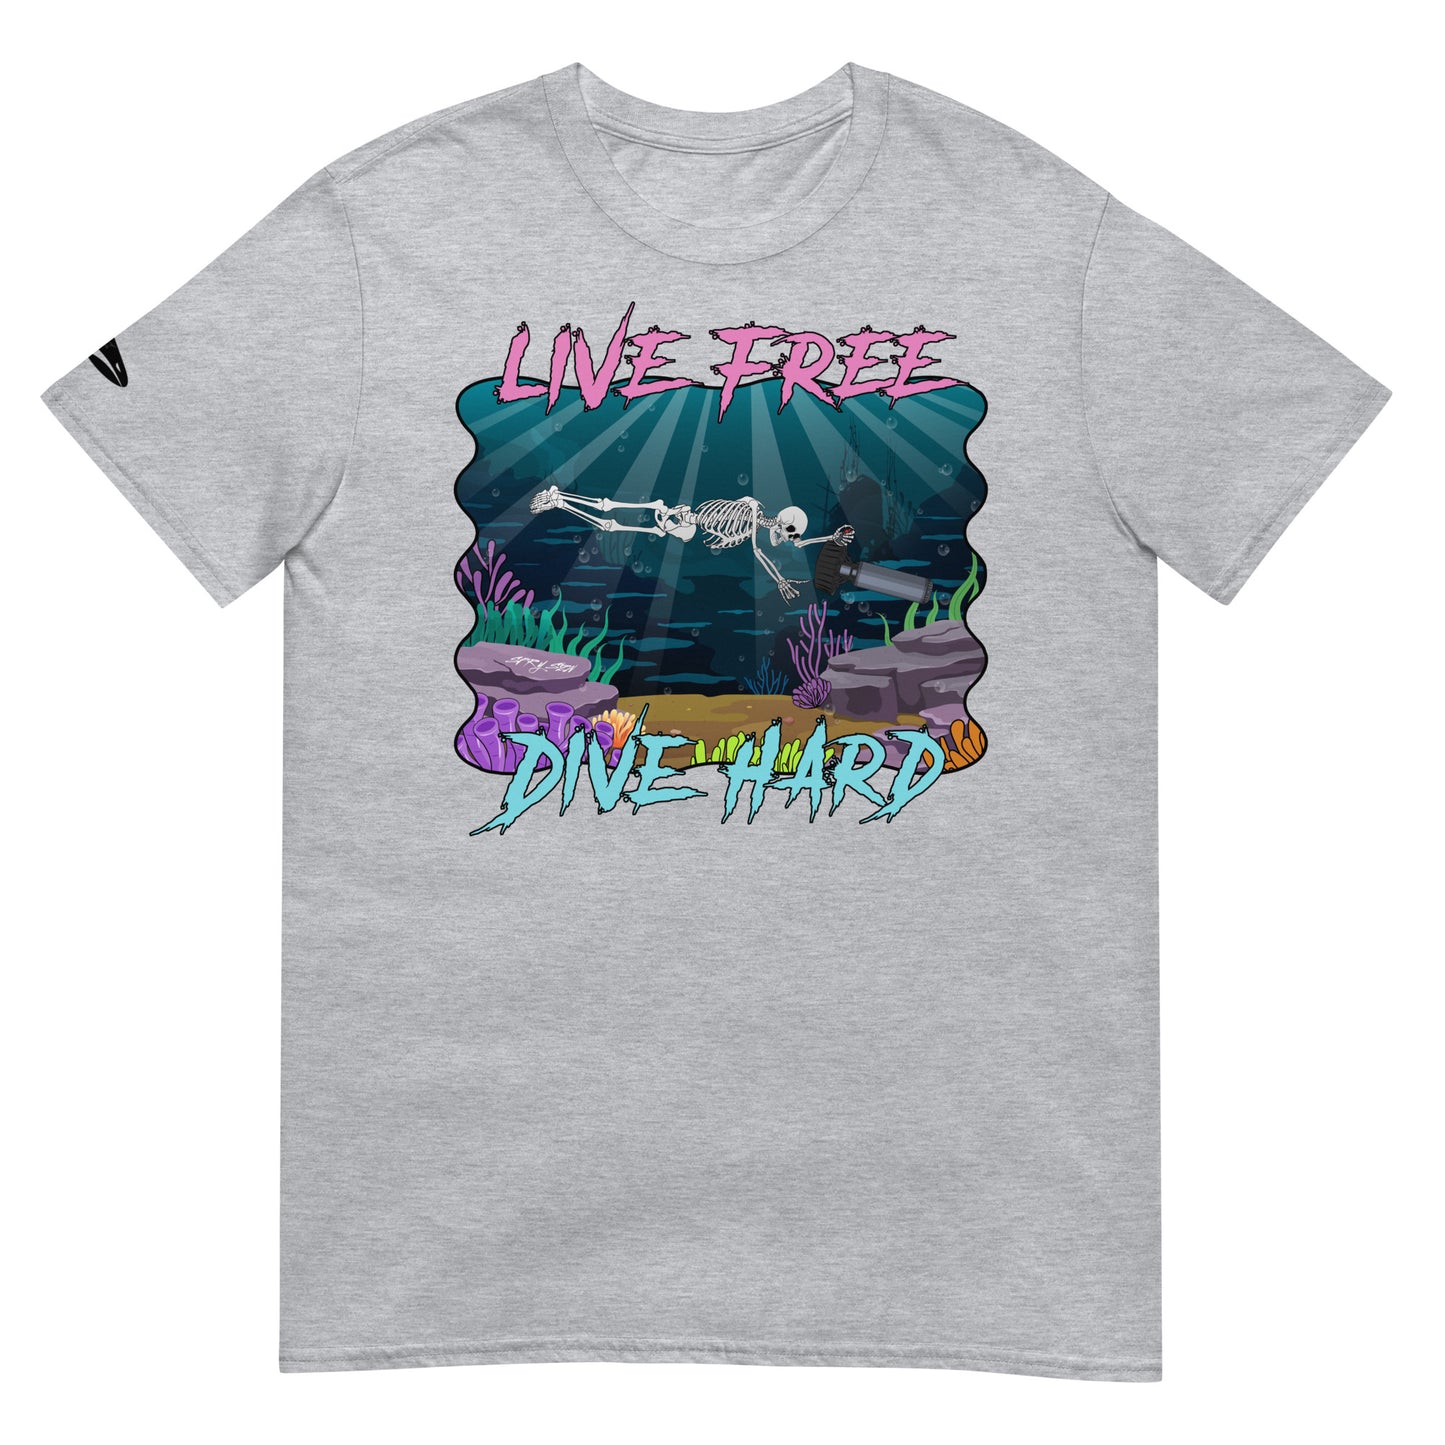 Graphic T - Live Free Dive Hard